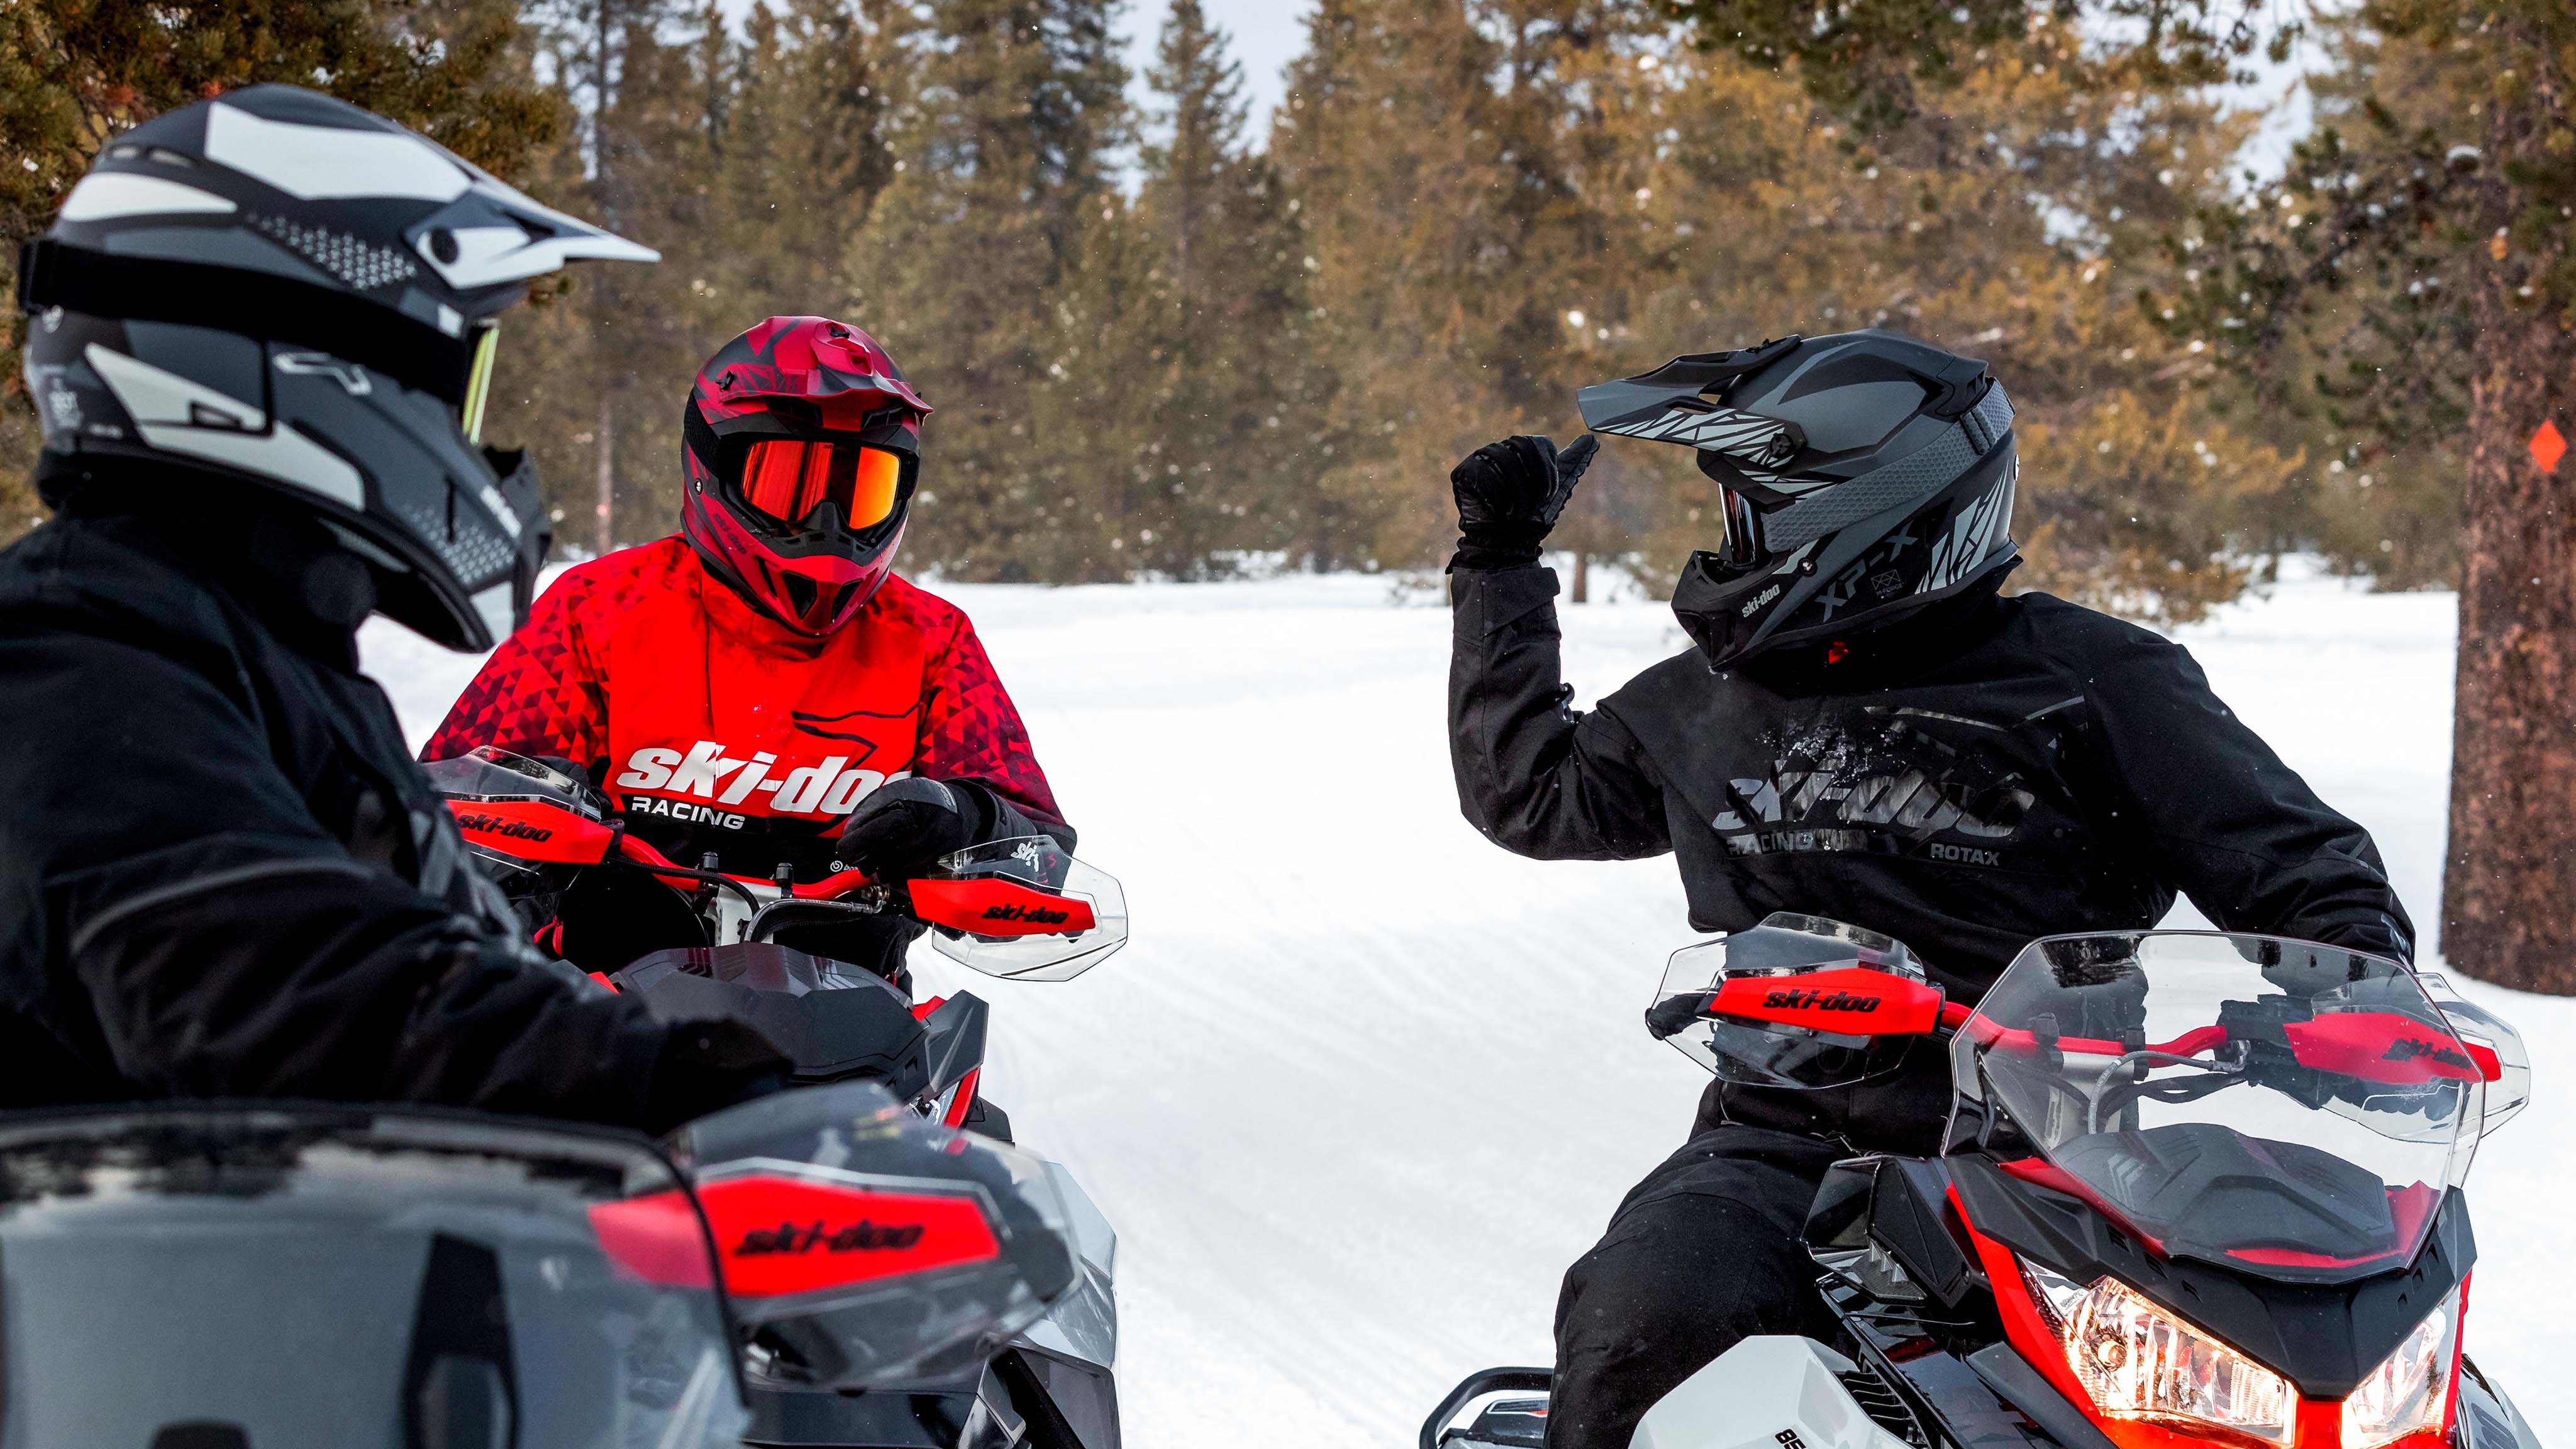 3 Ski-Doo riders on a forest trail  